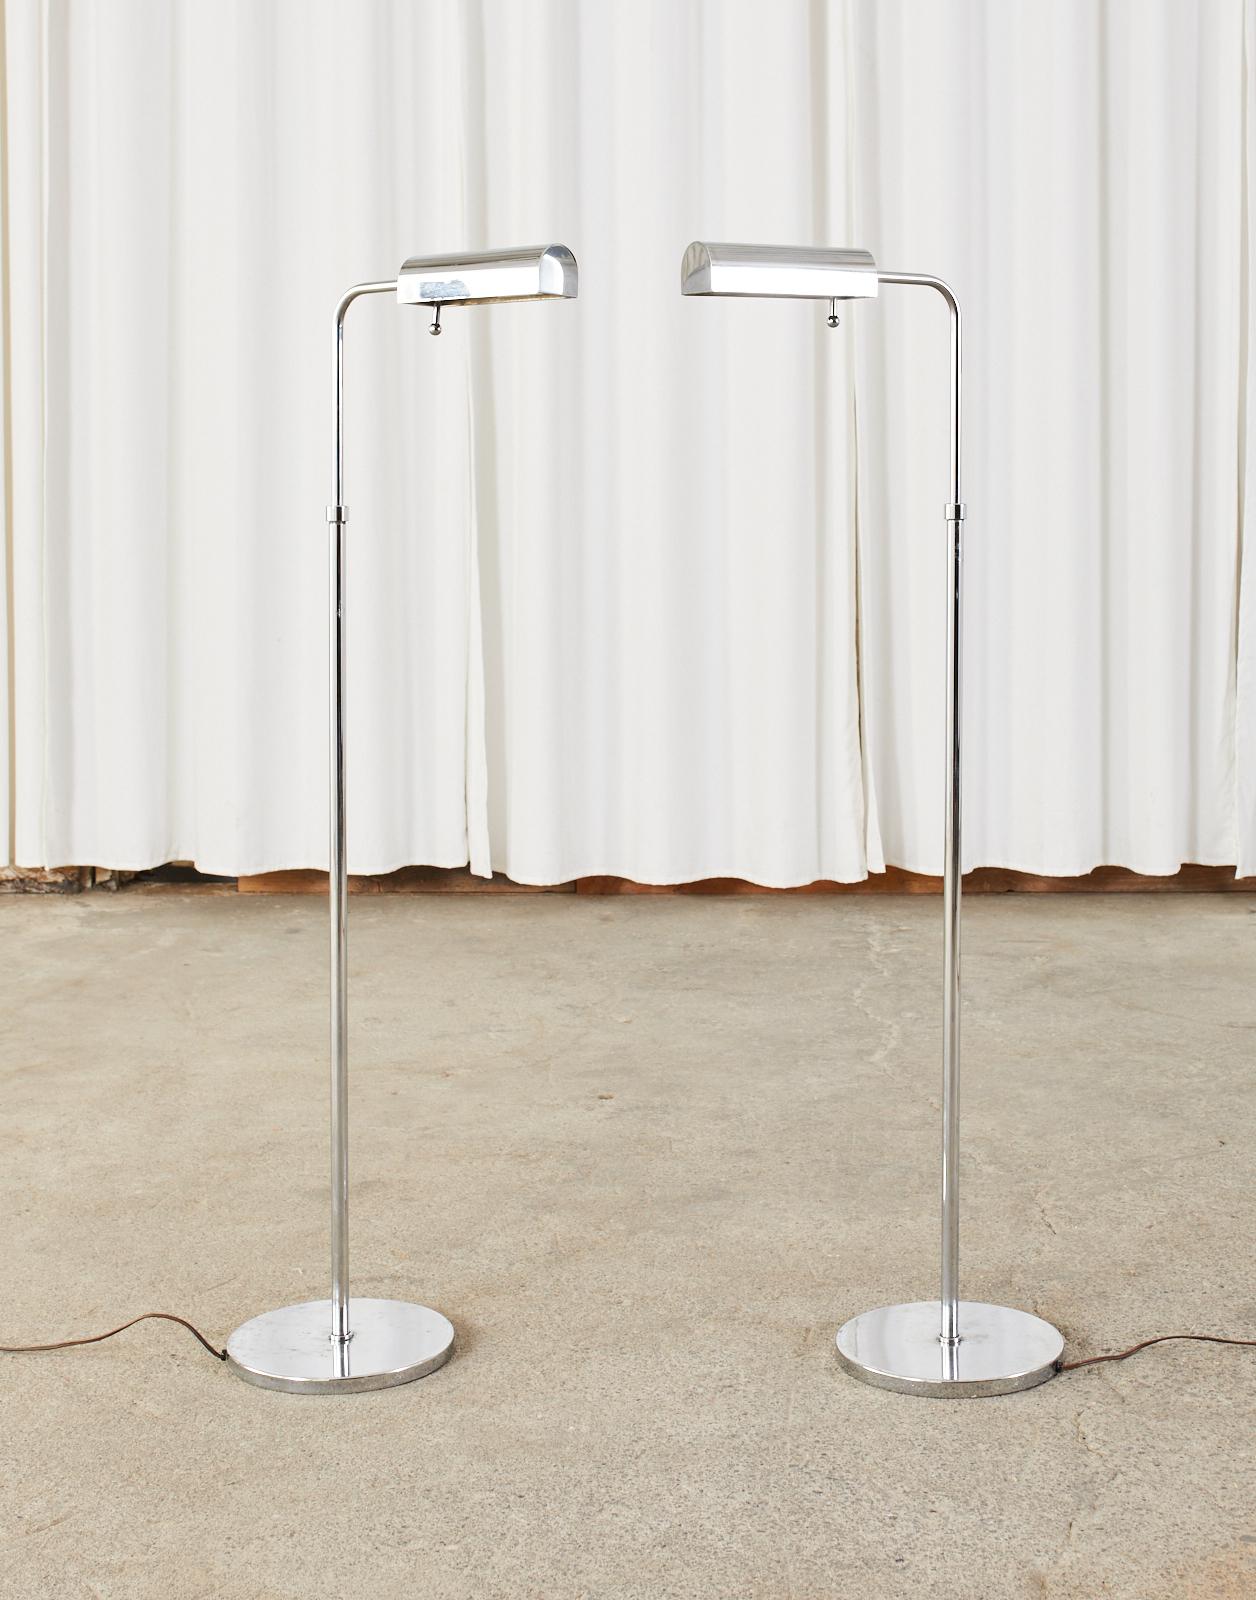 Gorgeous pair of mid-century modern height adjustable pharmacy floor lamps featuring a thick nickel chrome finish. The weighted lamps adjust from 44 inches to an amazing 58 inches high with a swivel and tilt head. The light has an adjustable dimmer